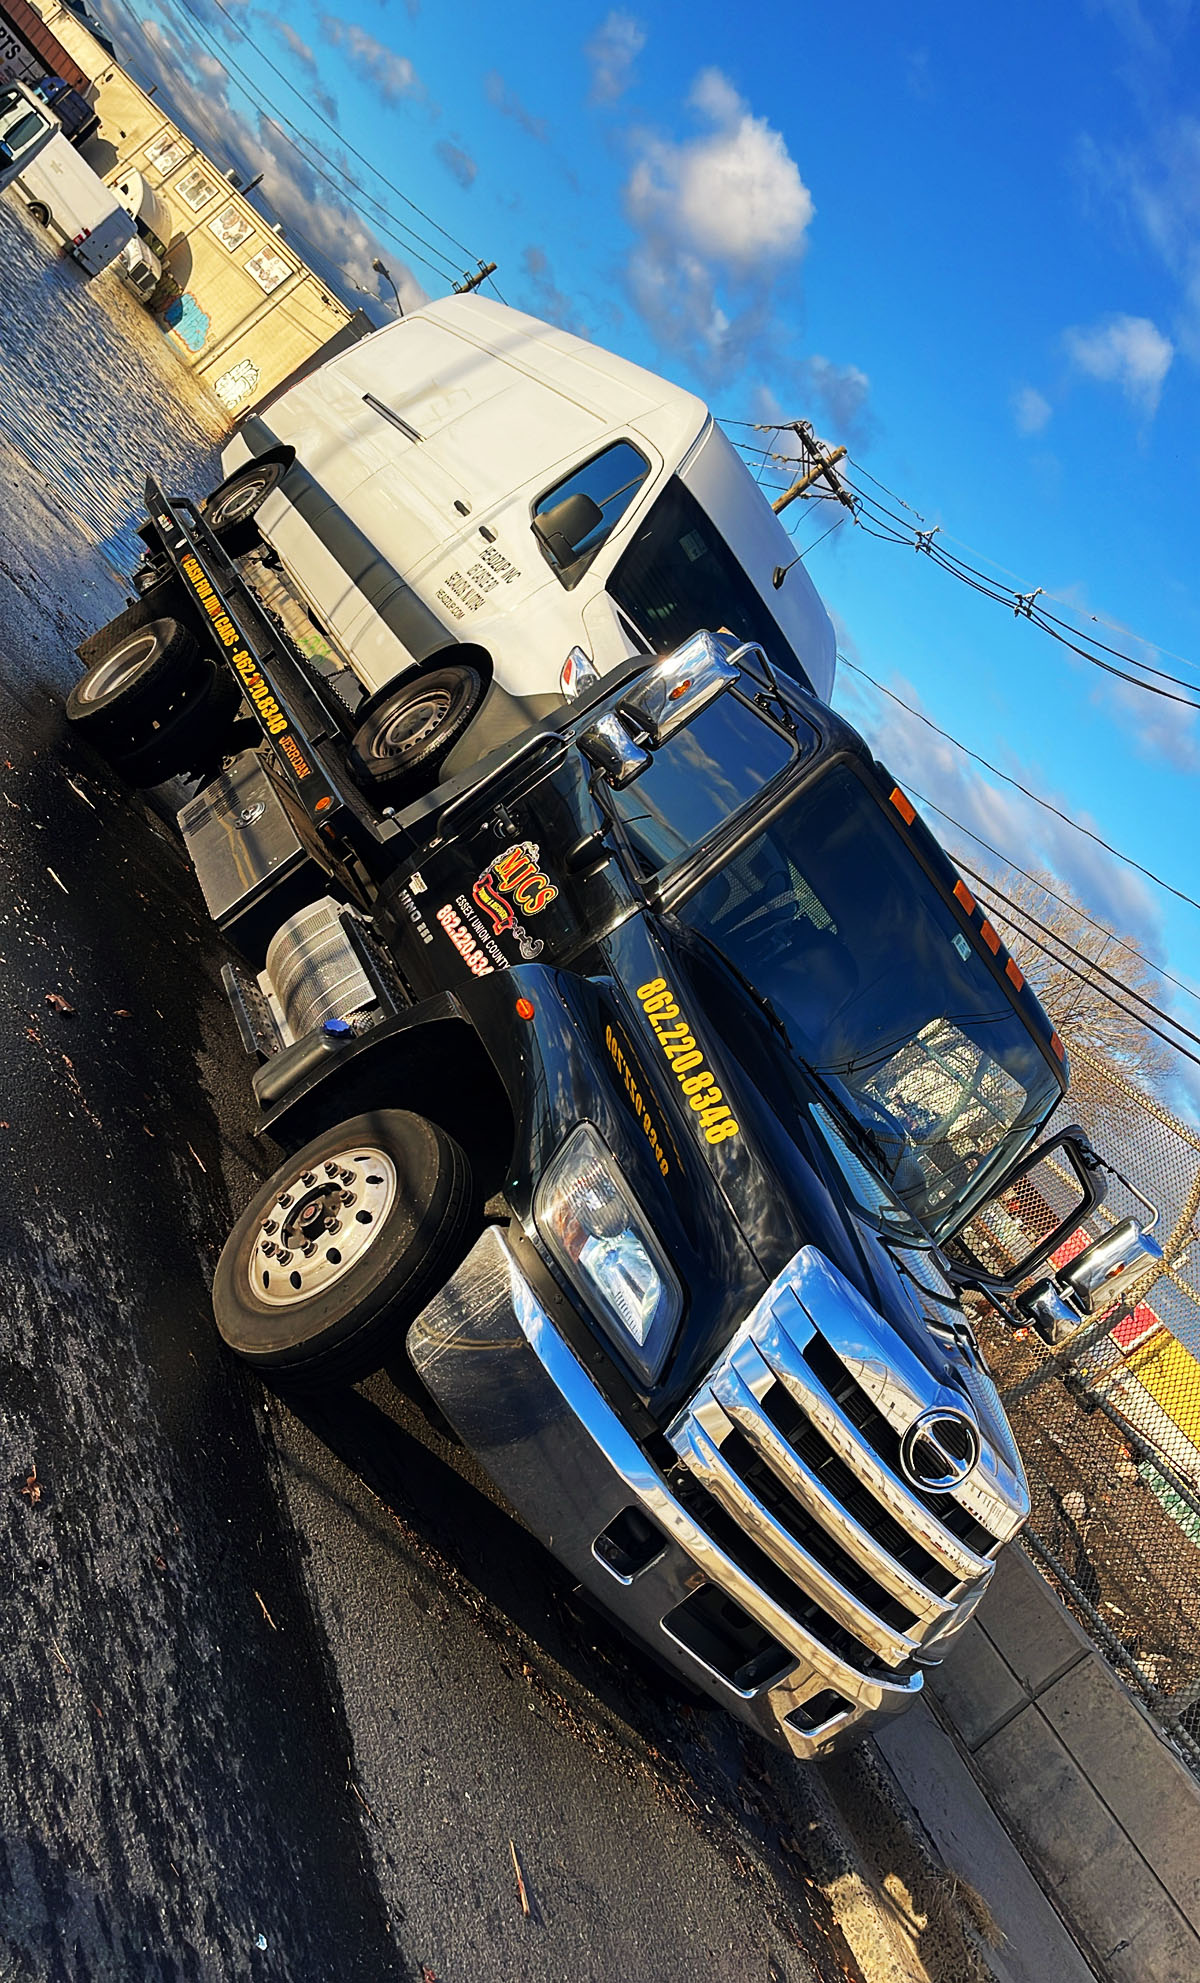 Services | Mjcs Towing &Amp; Recovery